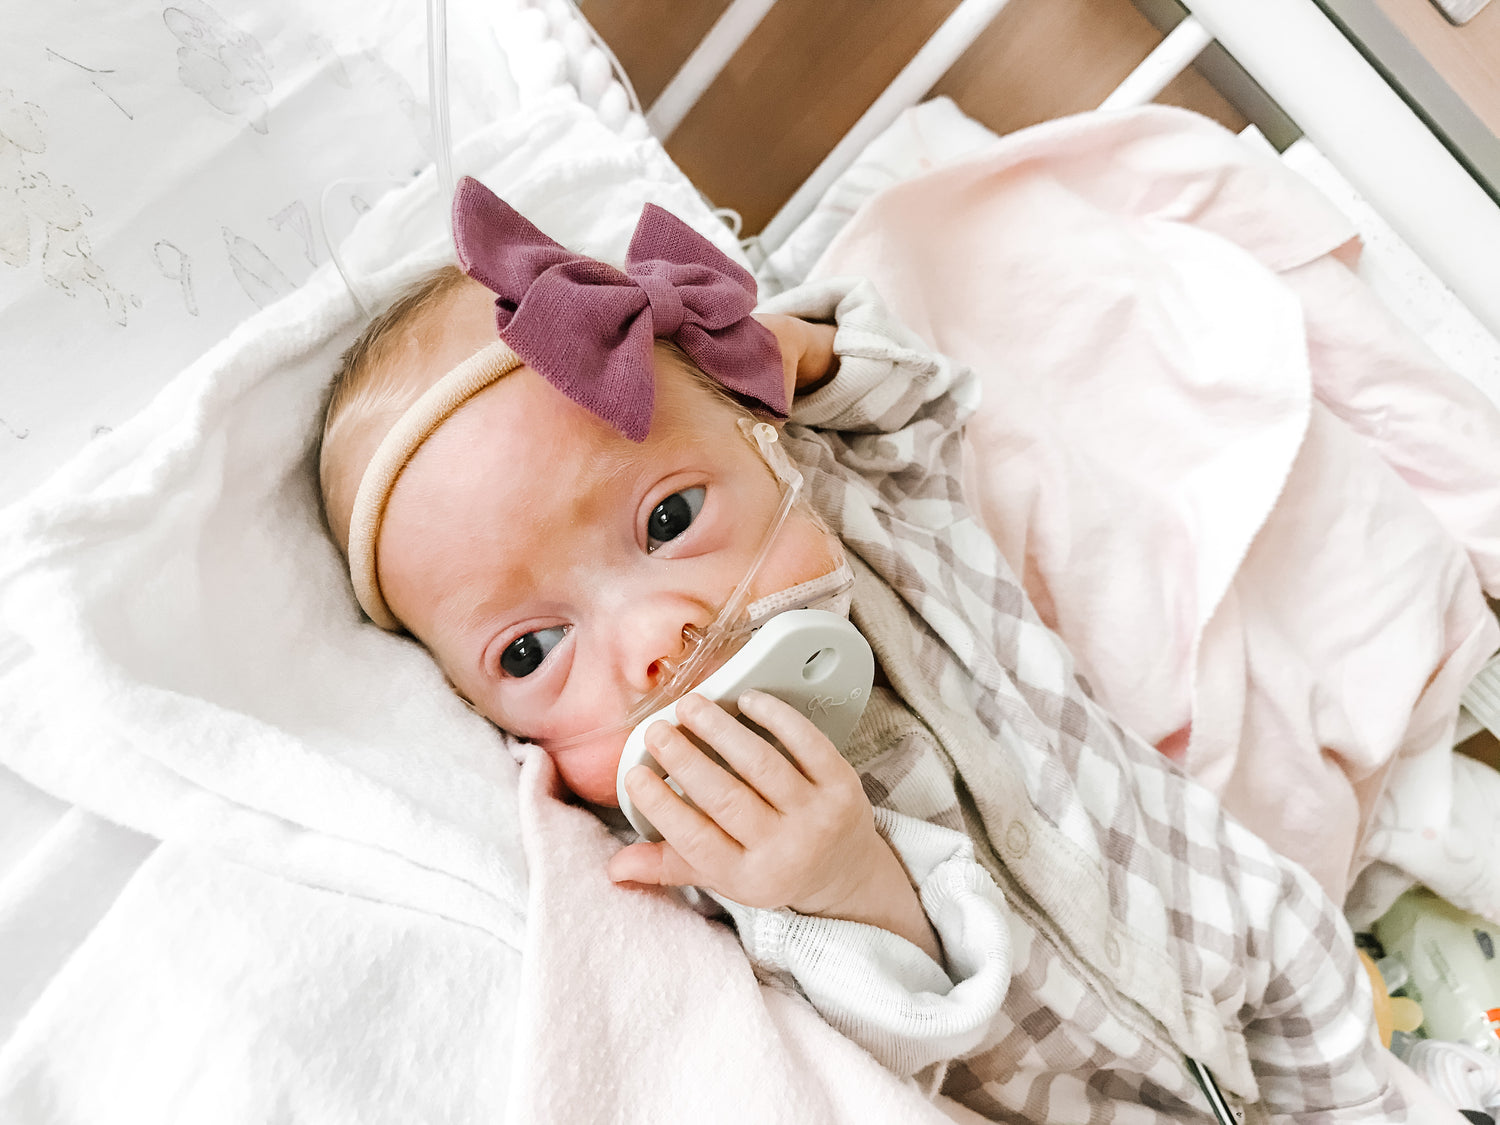 World Prematurity Day: A Spotlight on the R&R Preemie Pacifiers